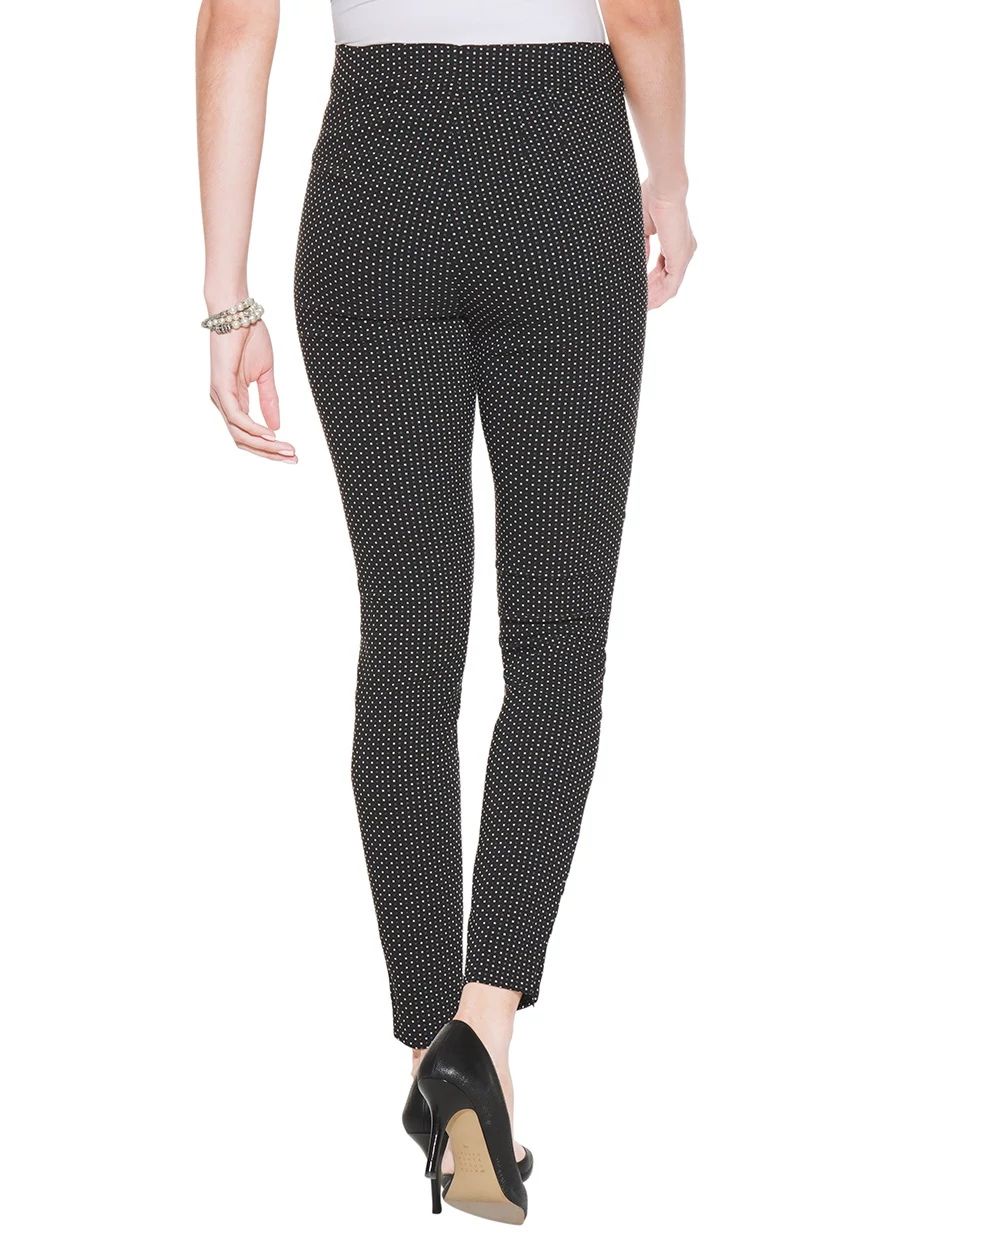 Outlet WHBM Dot-Jacquard Skinny Ankle Pants click to view larger image.